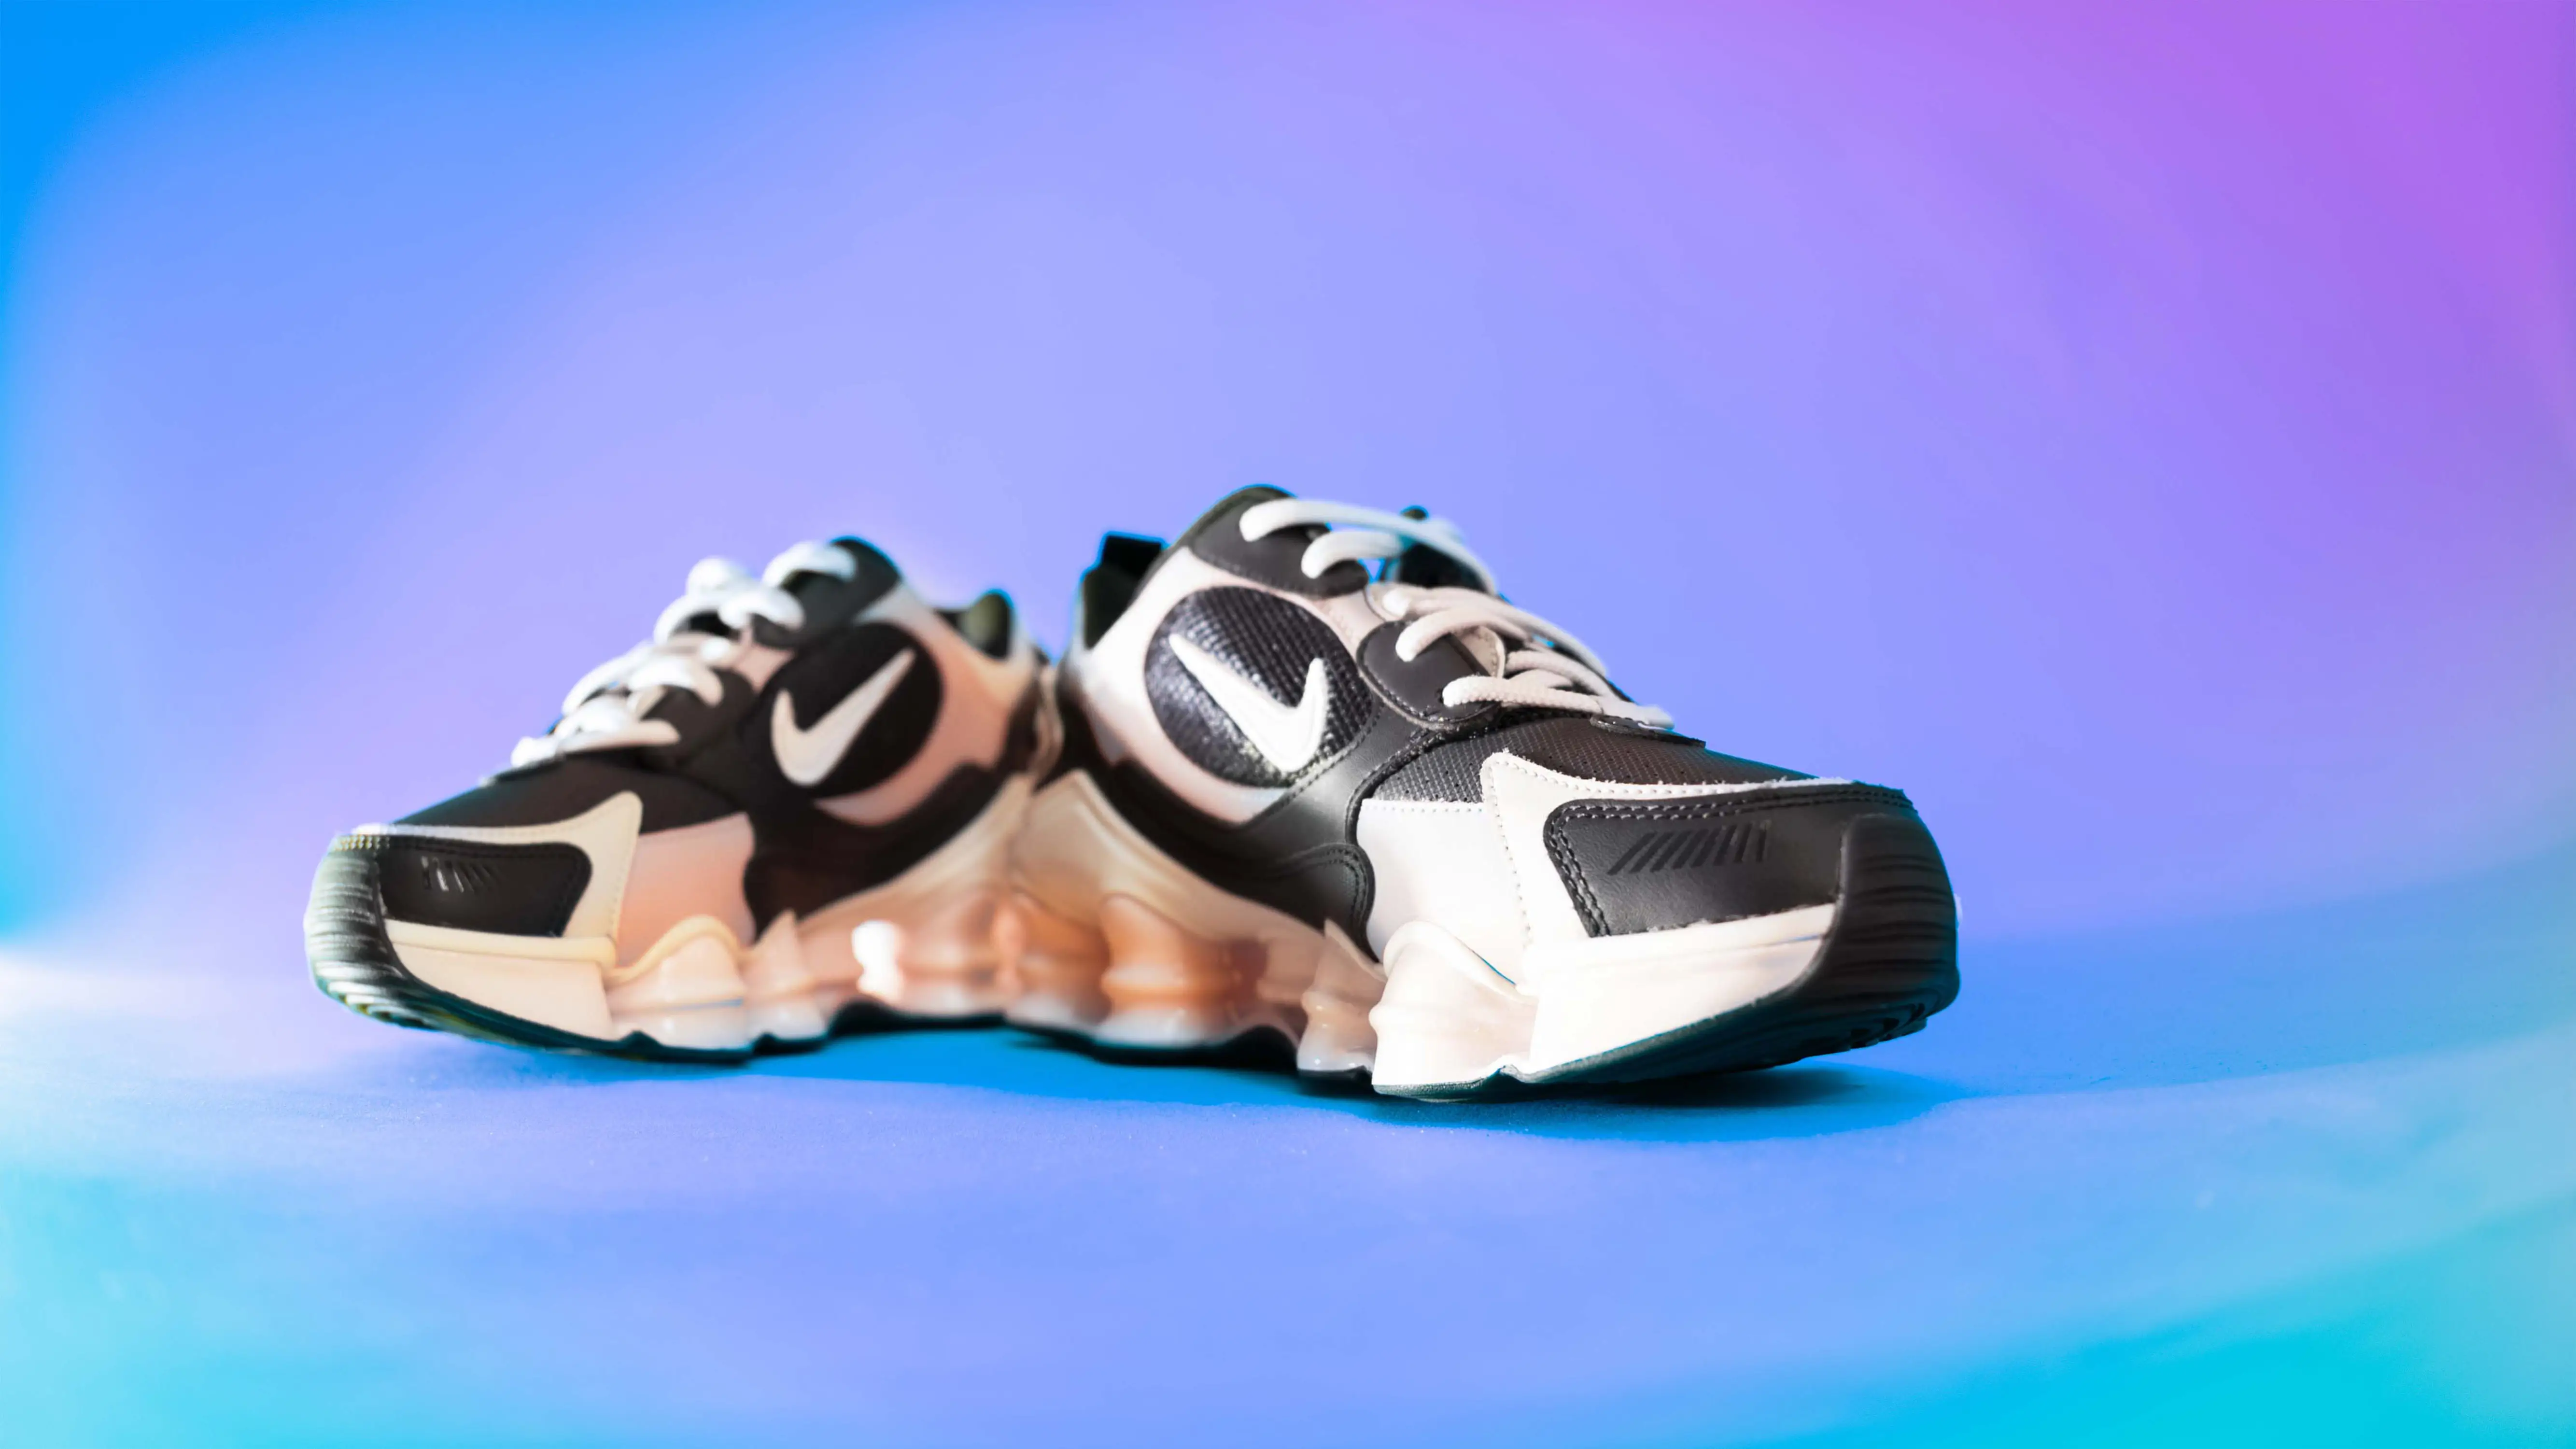 Discover: Why the Nike Shox Was Always Ahead of Its Time